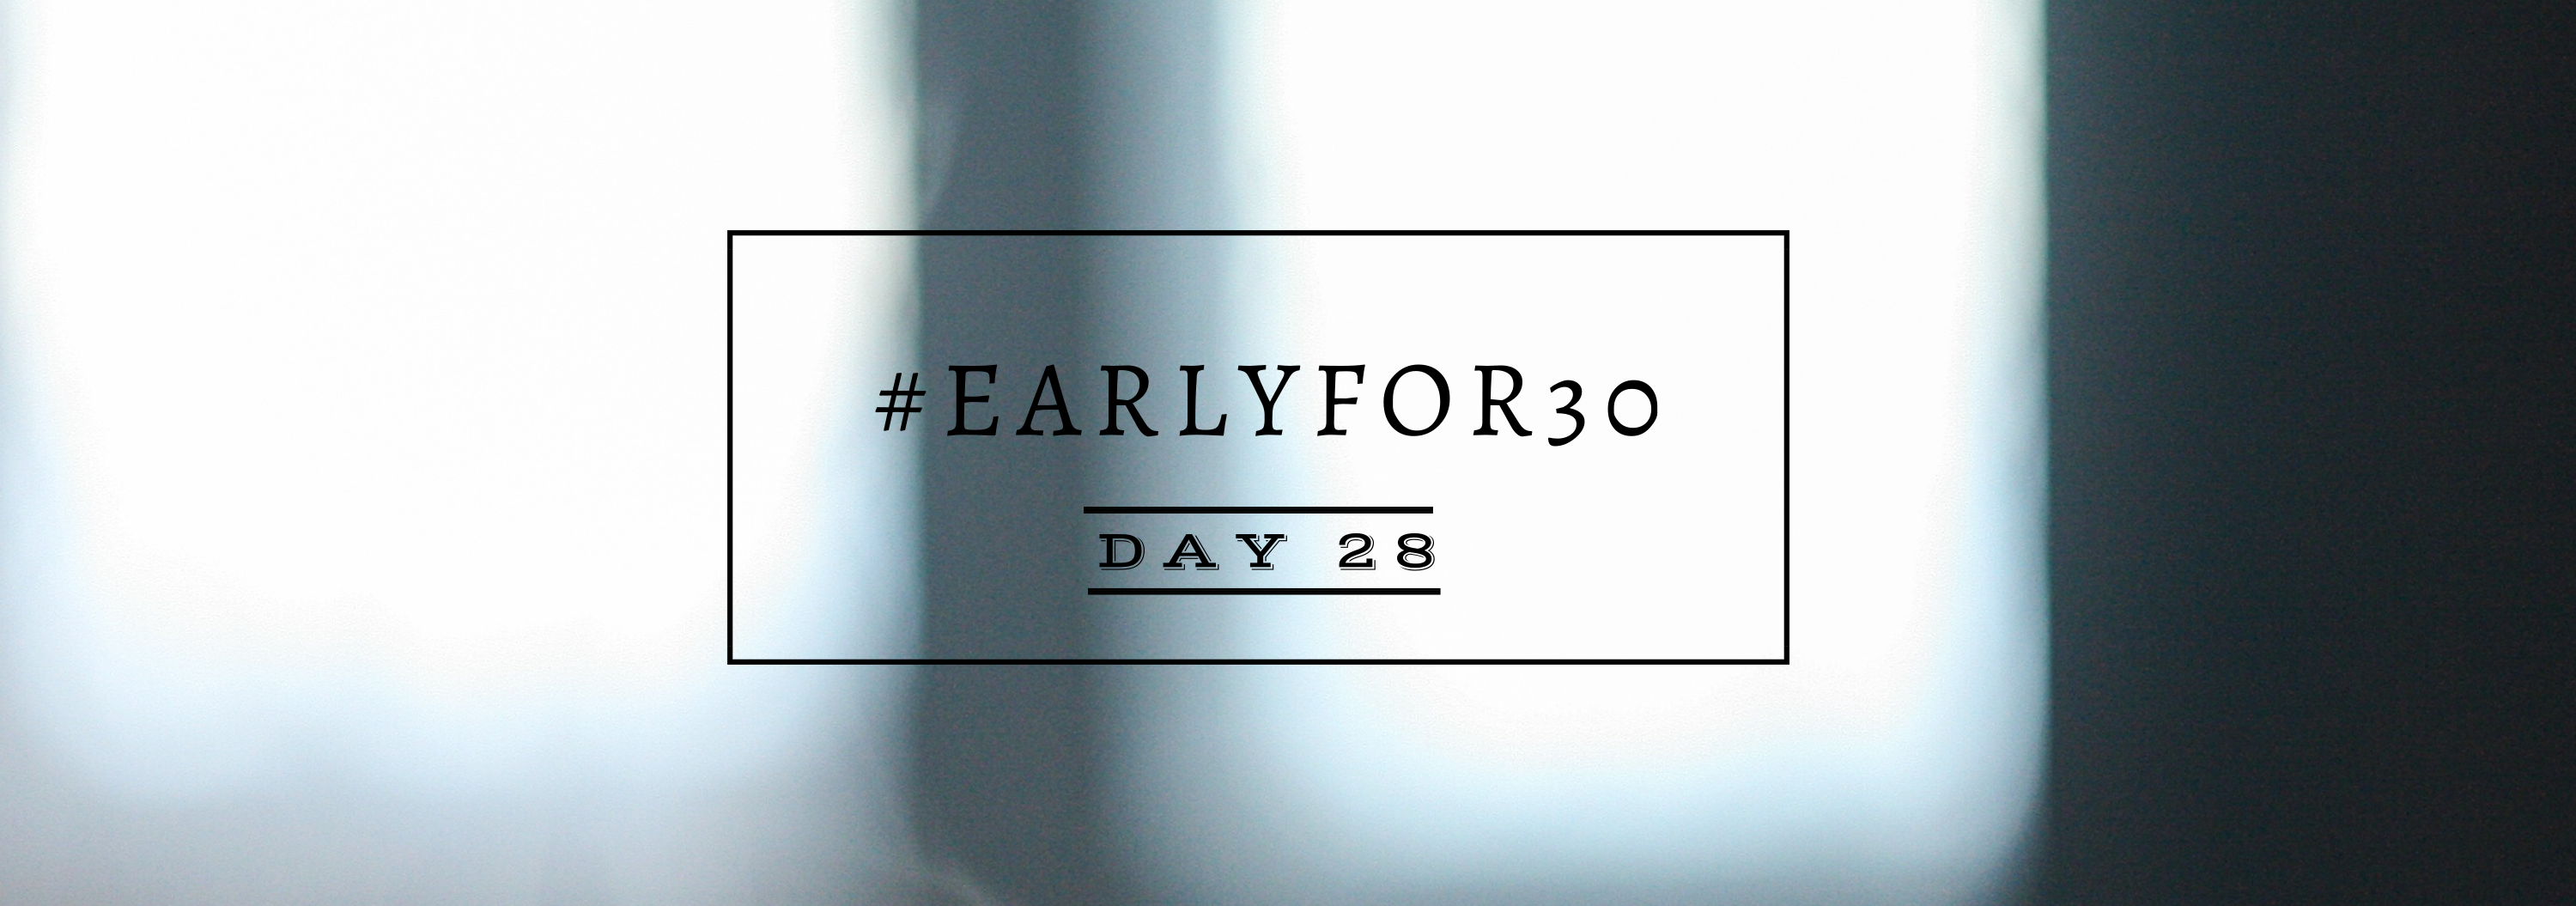 Day 28 Early for 30 Days Challenge